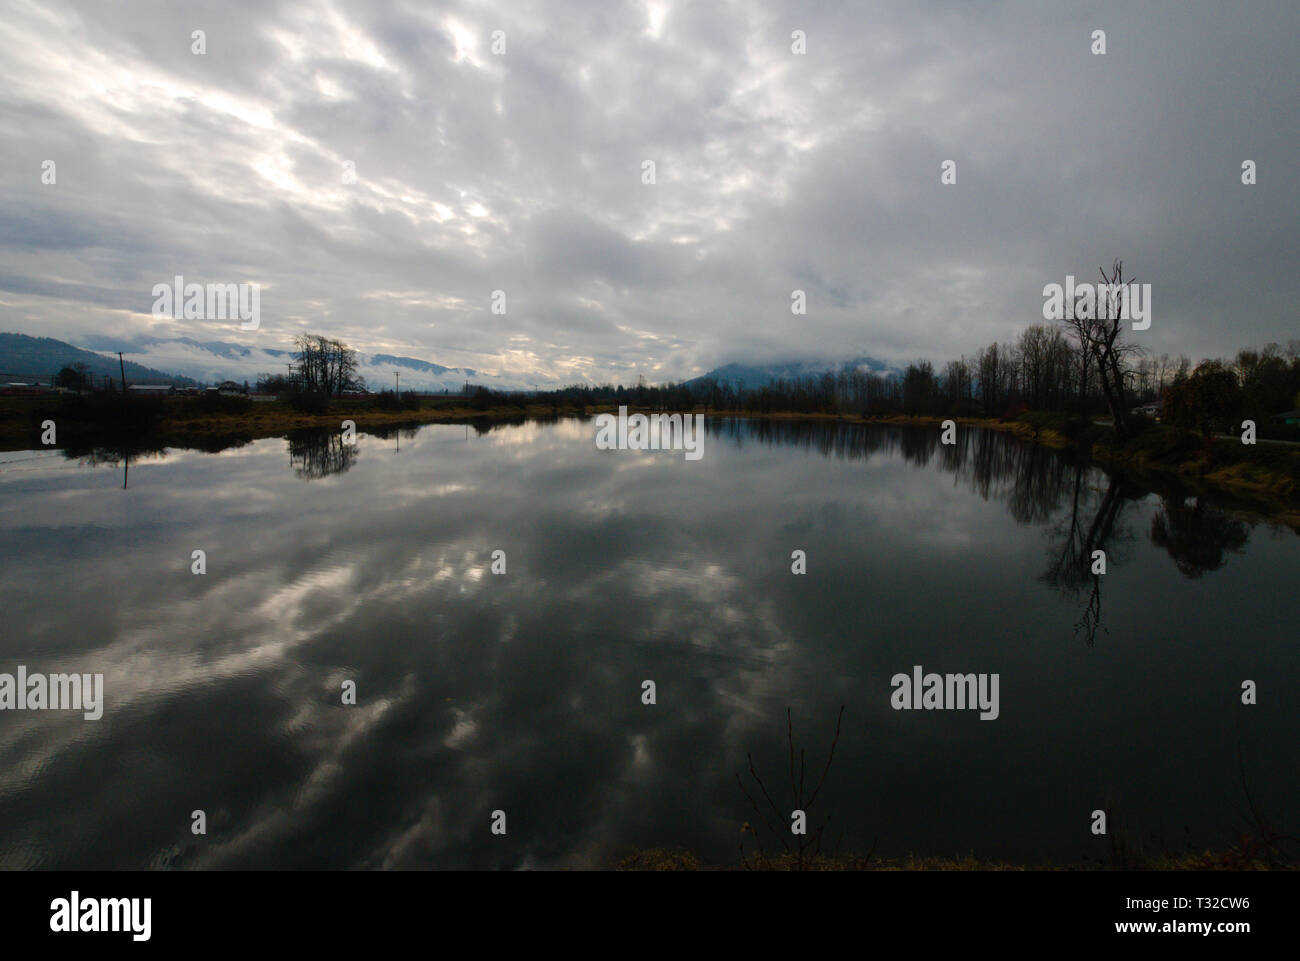 A placid backwater of the Vedder River reflects a turbulent gray overcast sky. Stock Photo